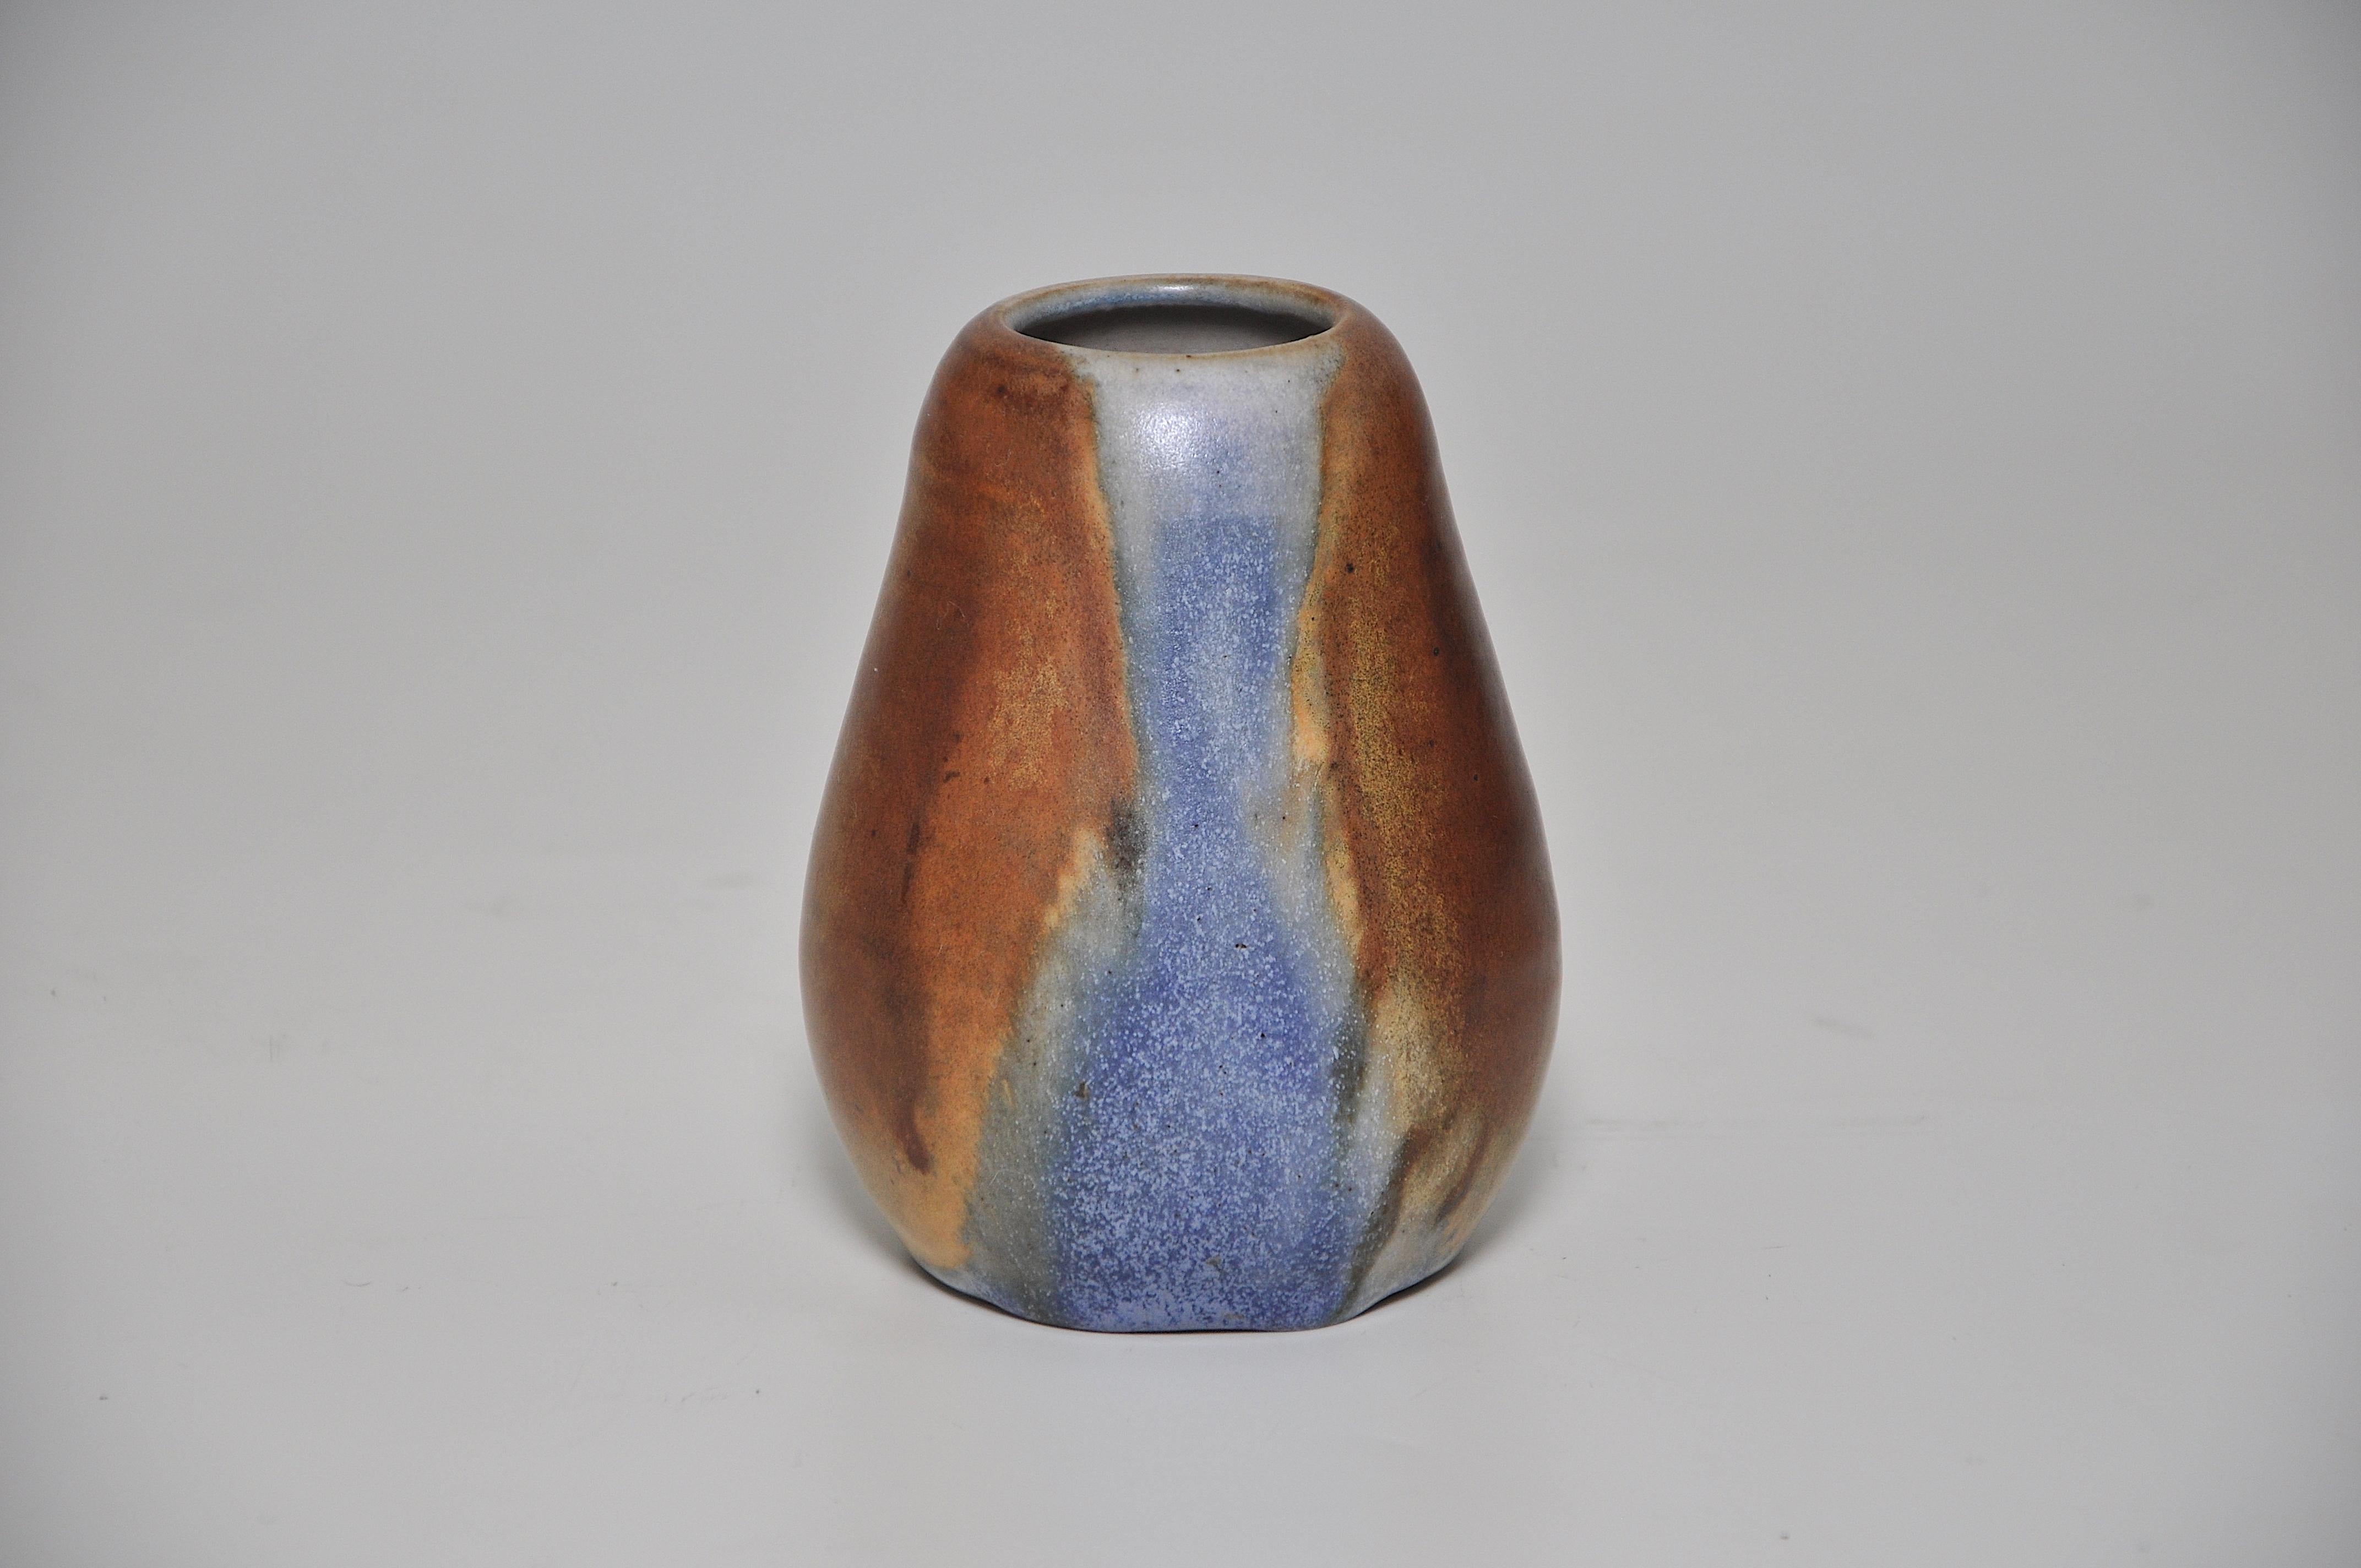 A piriform or pear-shaped stoneware vase of Japonist inspiration. Covered with a flowing glaze in tranches of pale blue and brown and ochre by the French art ceramist Jean Pointu (1843-1925) of the important ‘Ecole de Carries’ group at